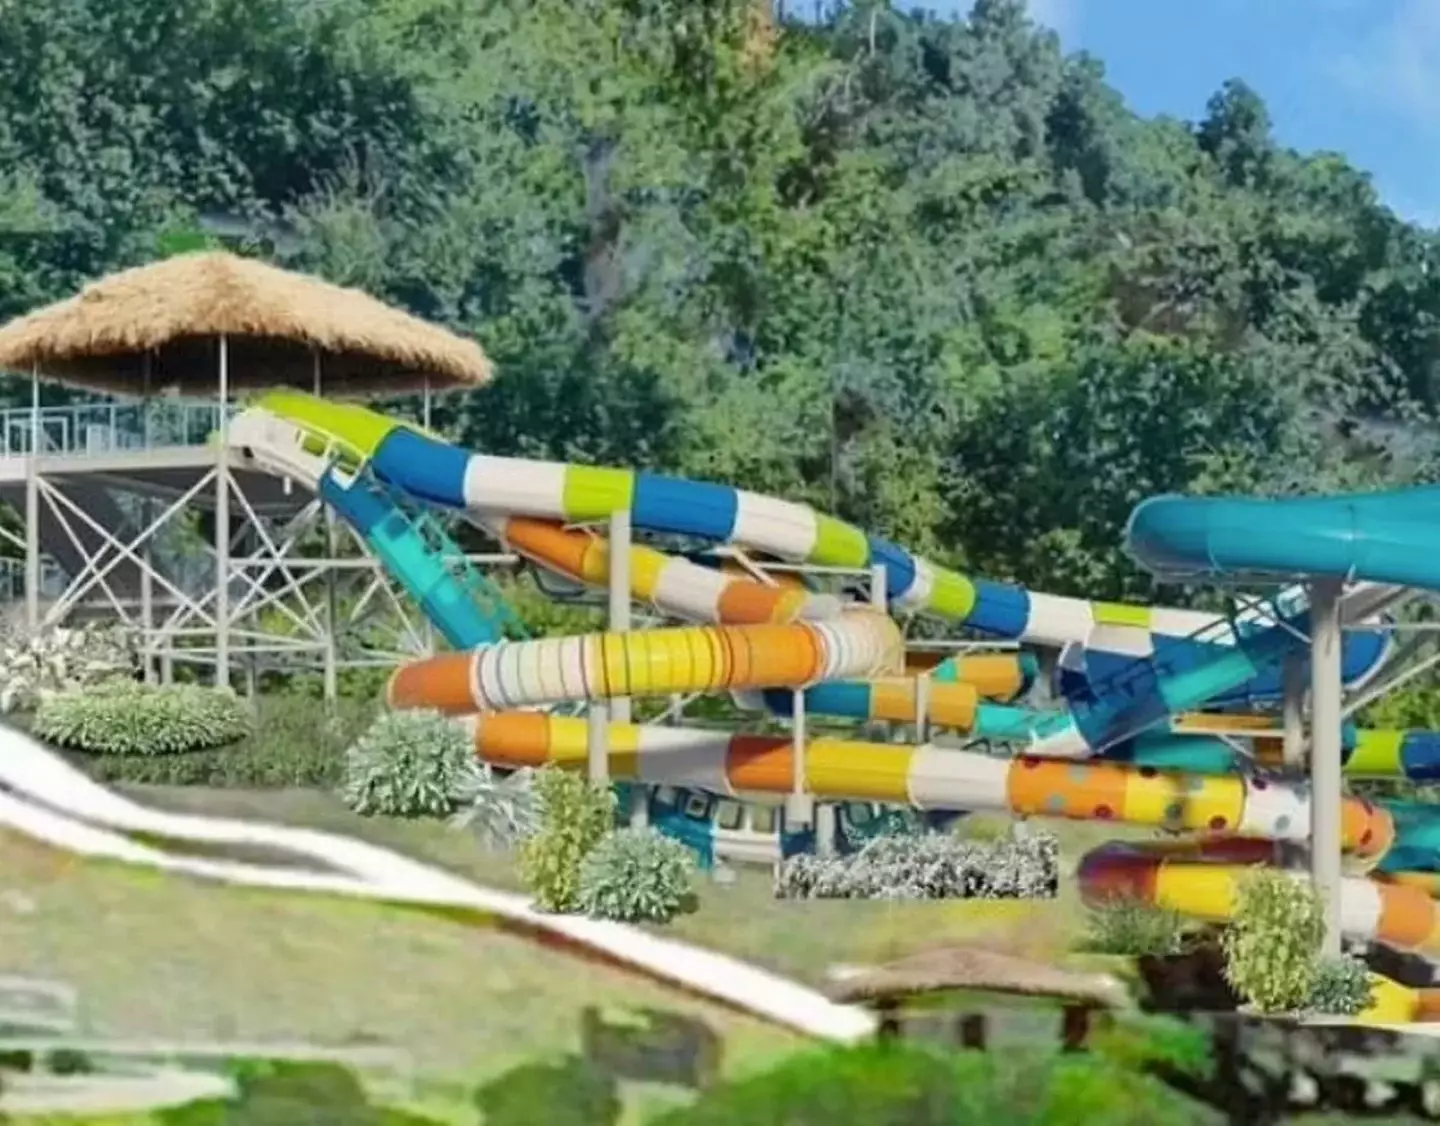 Now a water park is set to be introduced this summer.